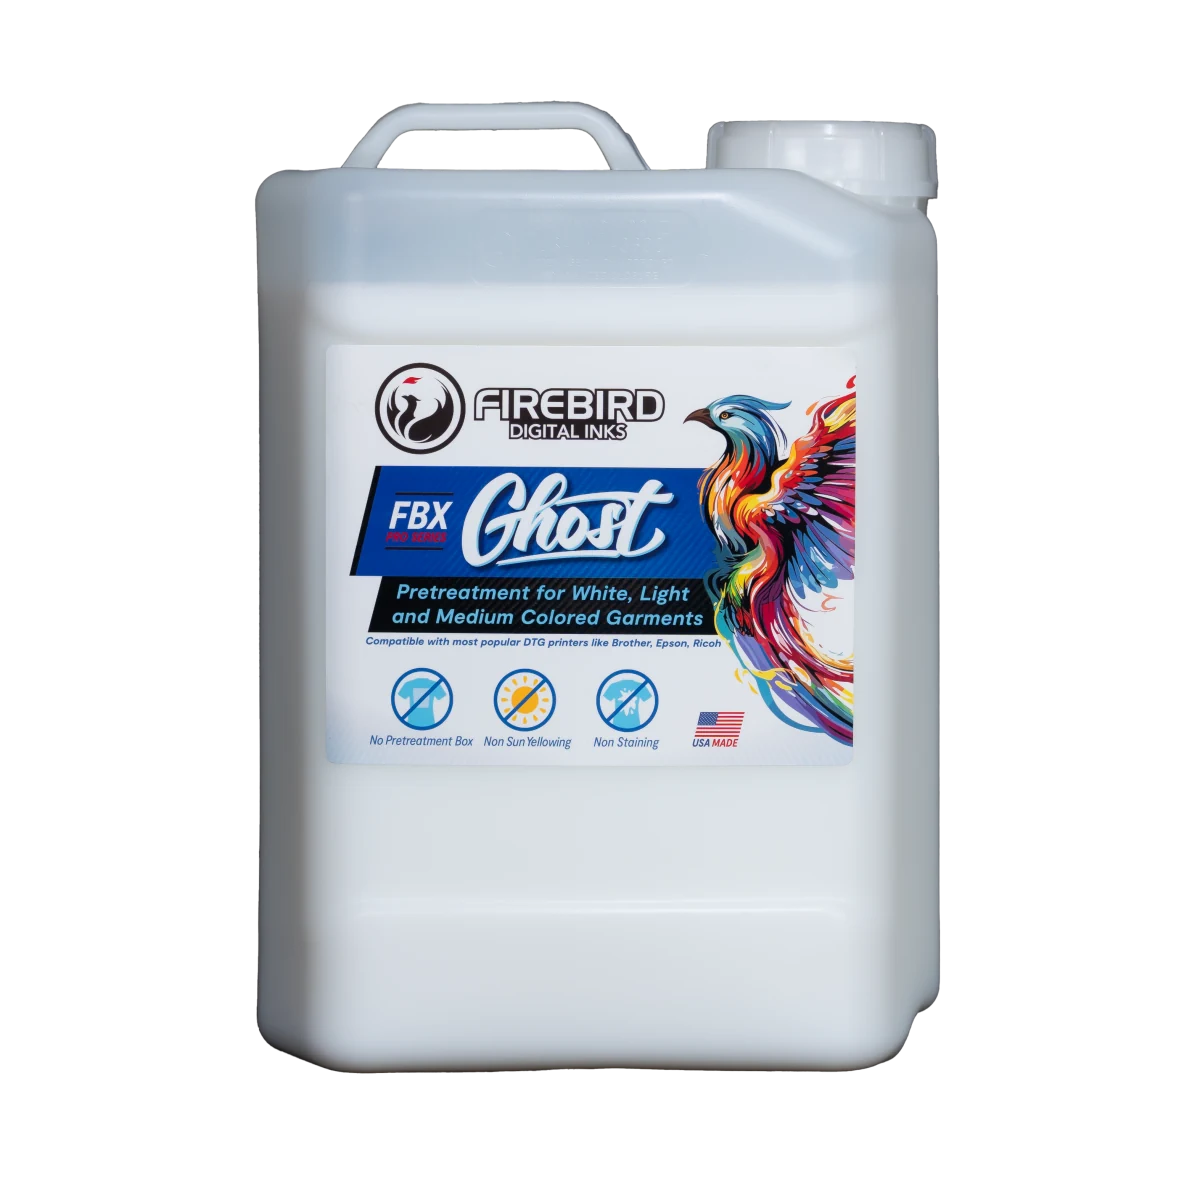 FBX Ghost - Pretreatment for White, Light and Medium Colored Garments